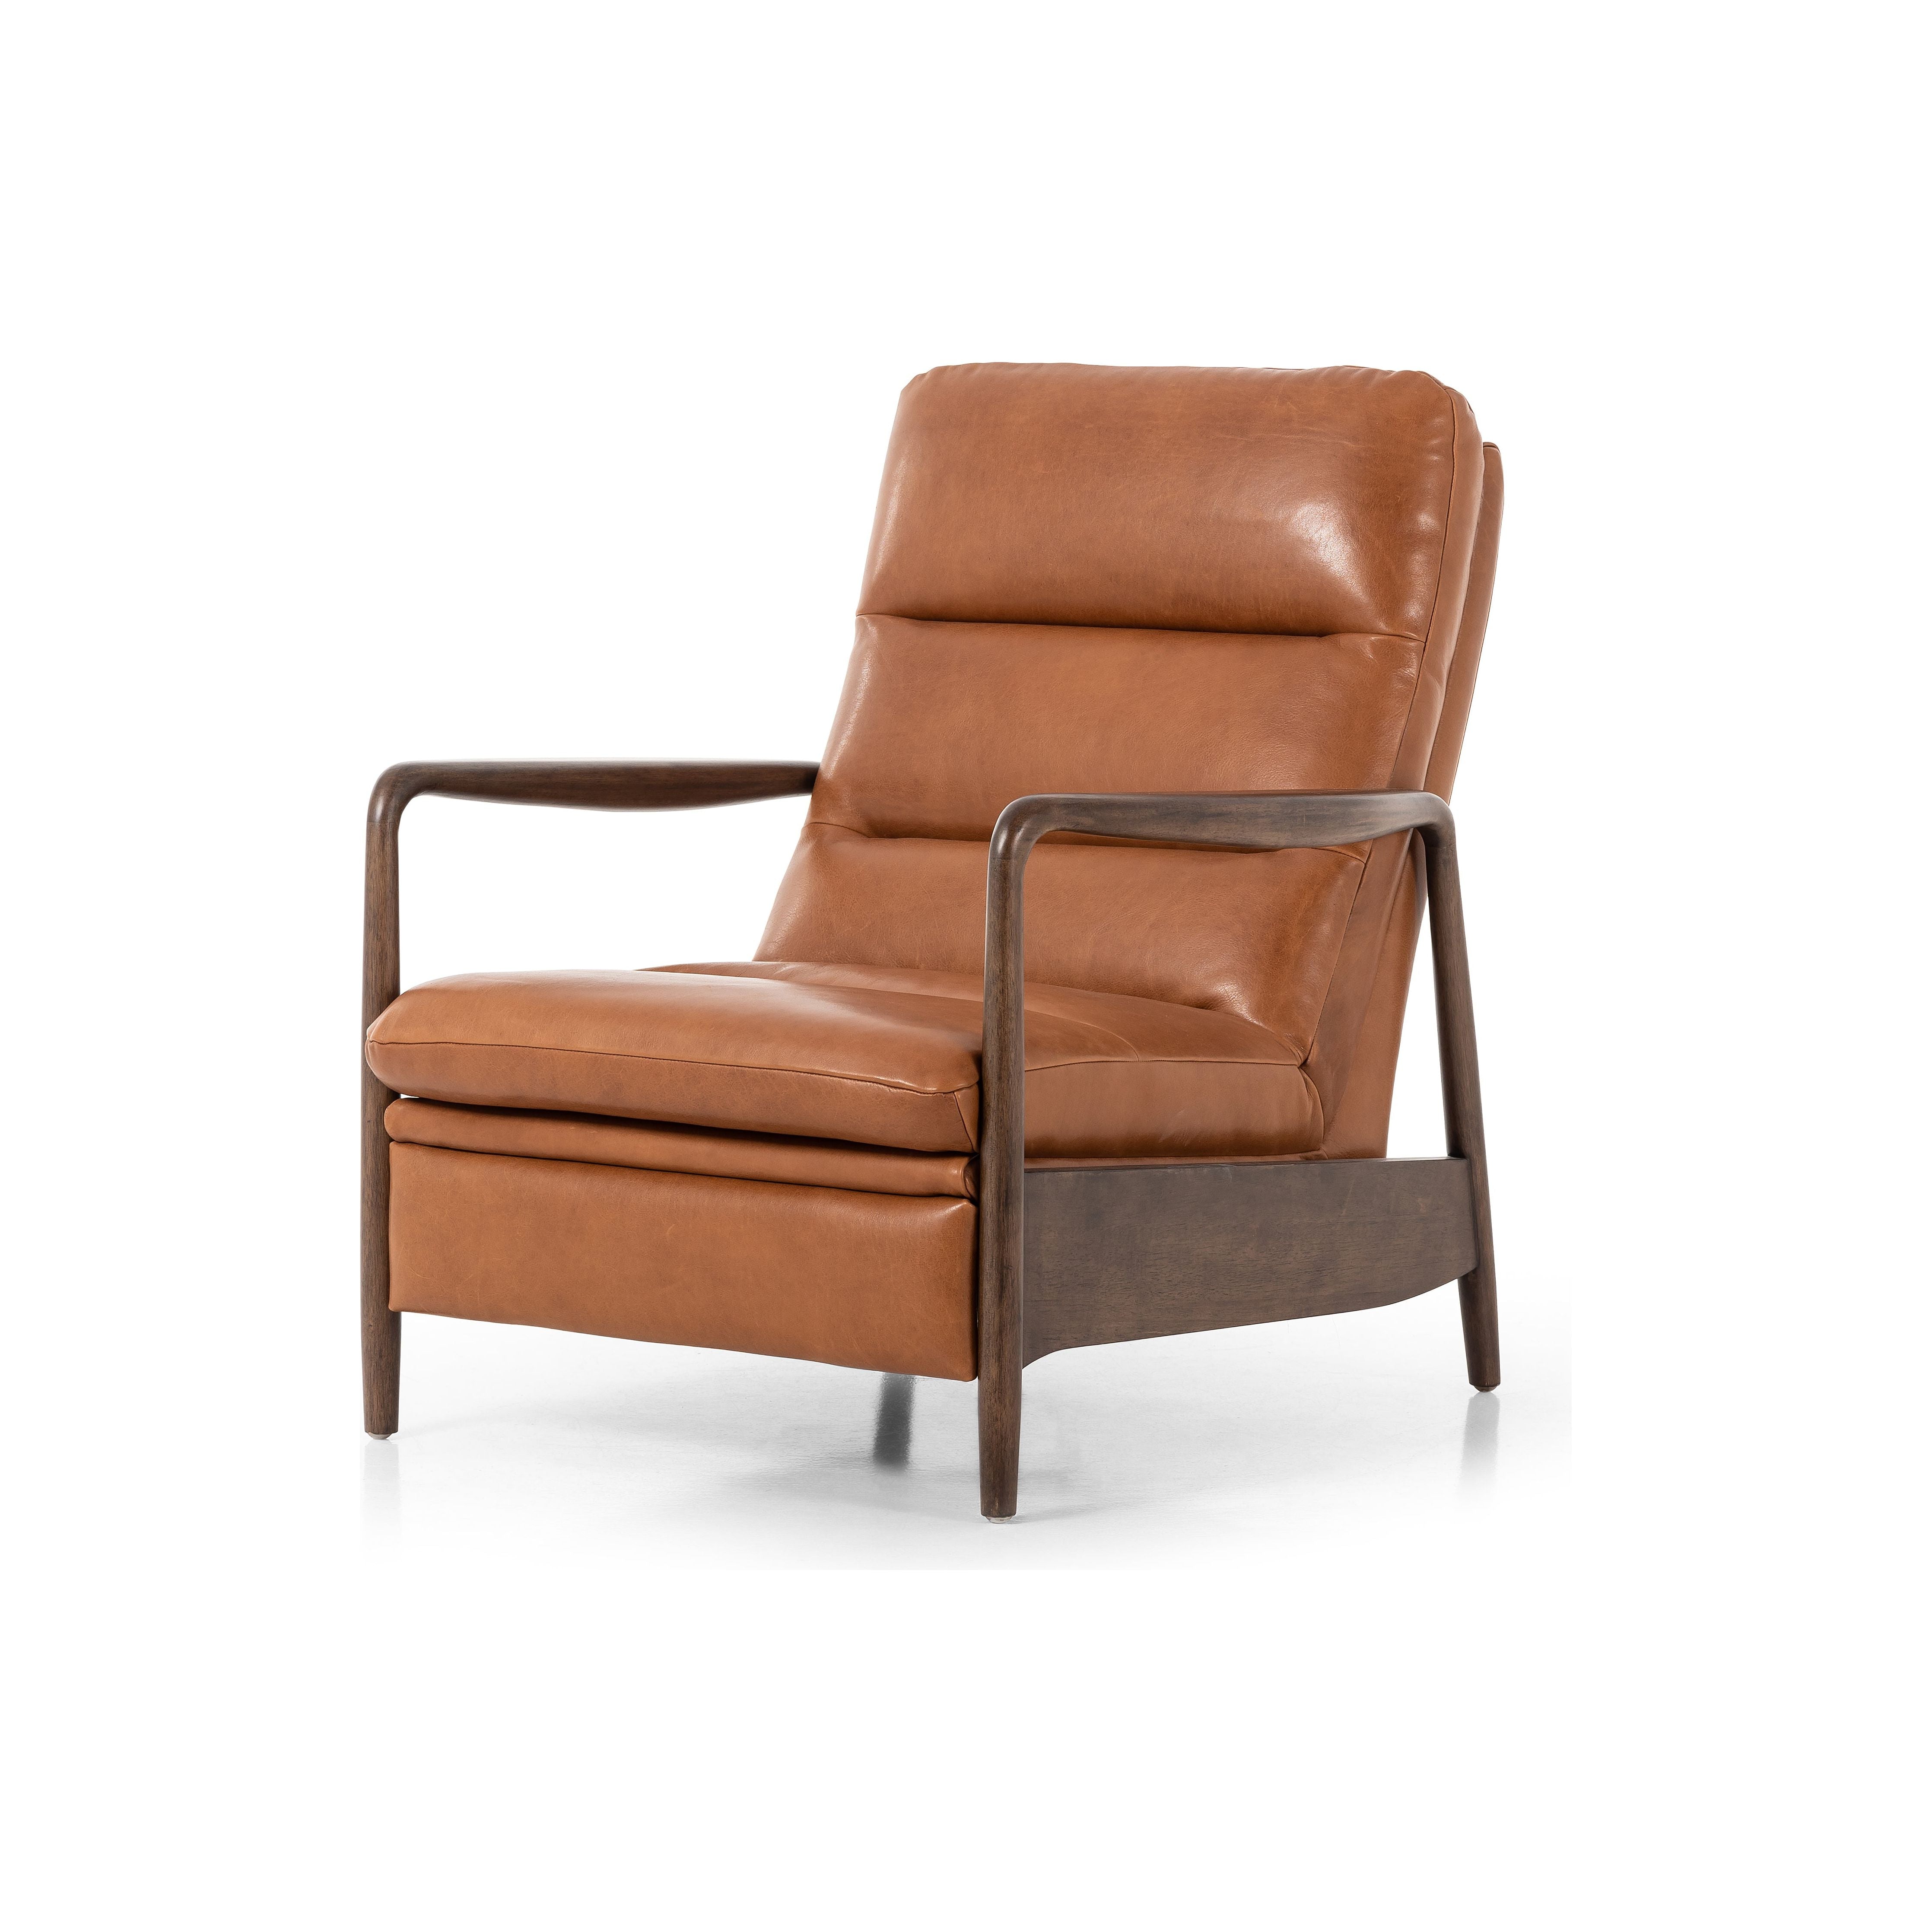 A sleek seat with hidden push-back reclining functionality. This midcentury-inspired recliner features wide chunky channeling paired with slim paddle arms and a tapered wood frame. Designed with a high seat and high back for extra comfy support. Upholstered in a timeless tobacco-hued leather made in a family-owned tannery in Thailand. Amethyst Home provides interior design, new construction, custom furniture, and area rugs in the Omaha metro area.